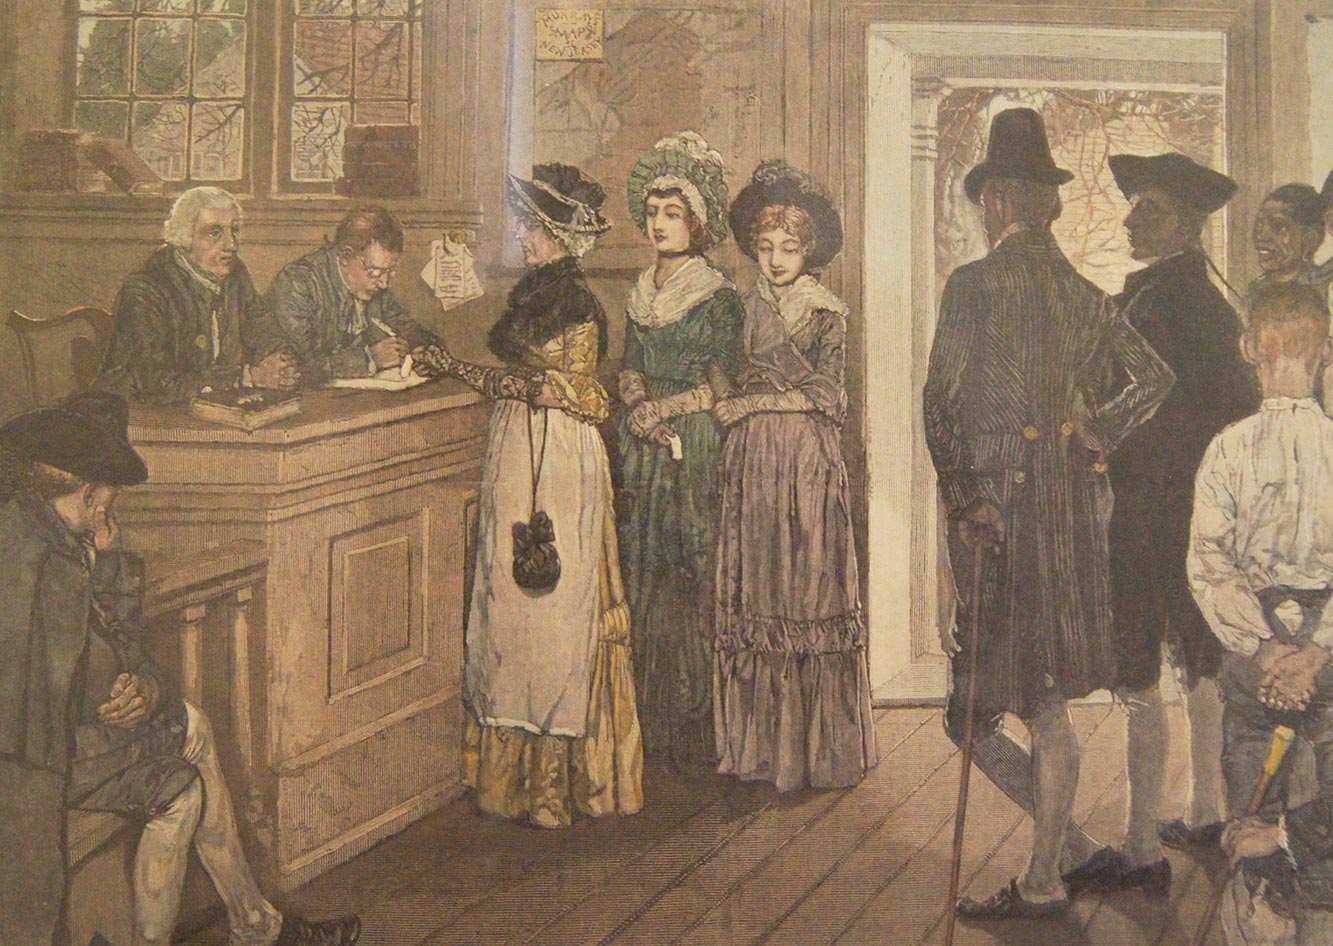 Howard Pyle, "Women at the Polls in New Jersey in the Good Old Times," Harper's Weekly, November 13, 1880. (Ann Lewis Women's Suffrage Collection) 